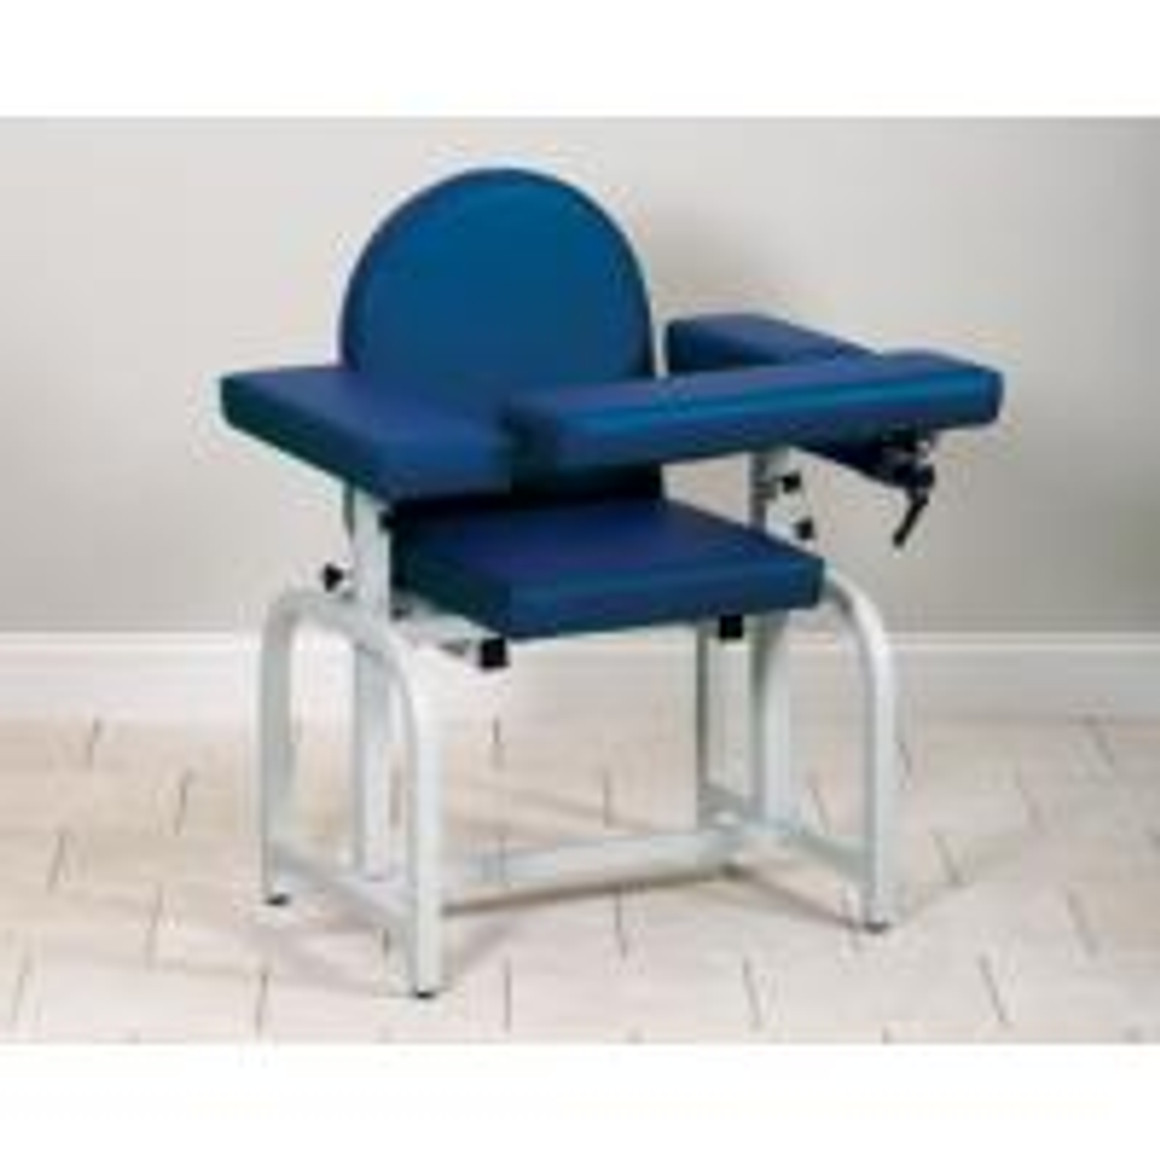 Clinton Lab X Series Blood Drawing Chair with Flip-Arm, Viscaya Palm